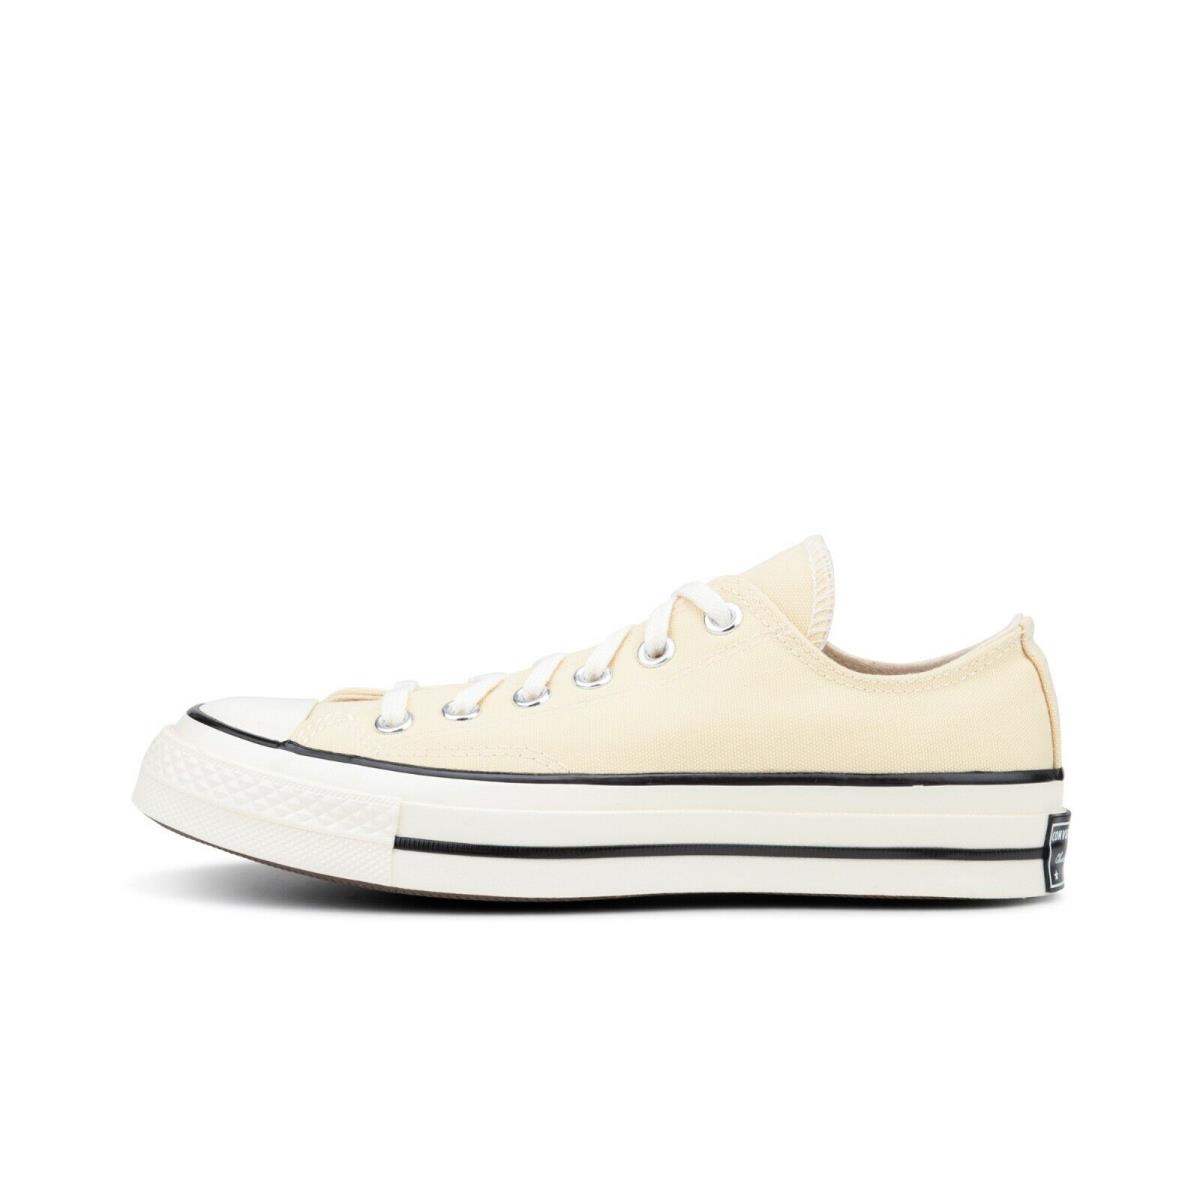 Converse Chuck 70 OX 170793C Women`s Yellow Canvas Athletic Shoes HS319